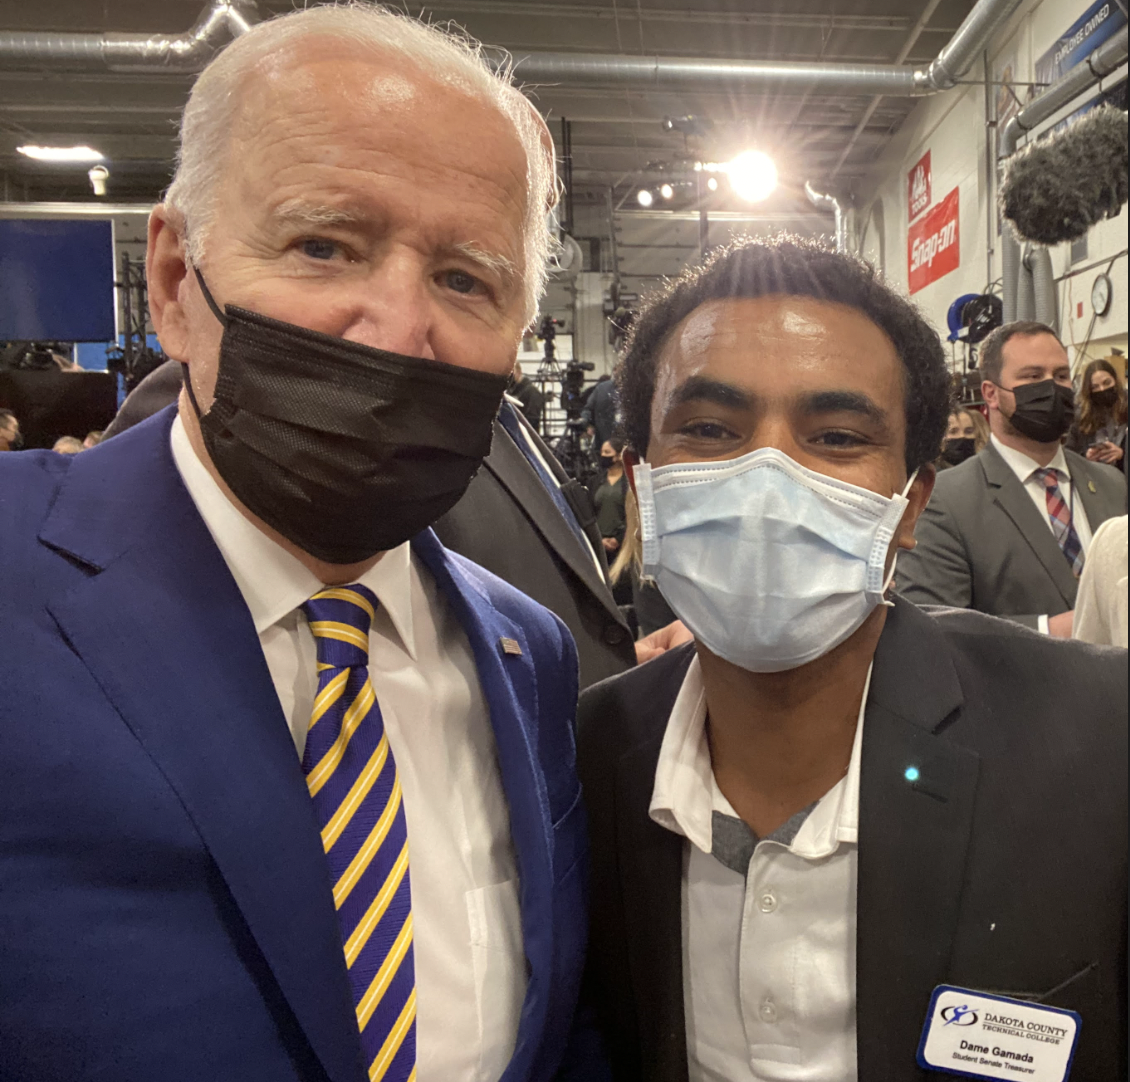 Dame Gamada poses for a photo with Joe Biden. Both men are wearing surgical masks and suits.